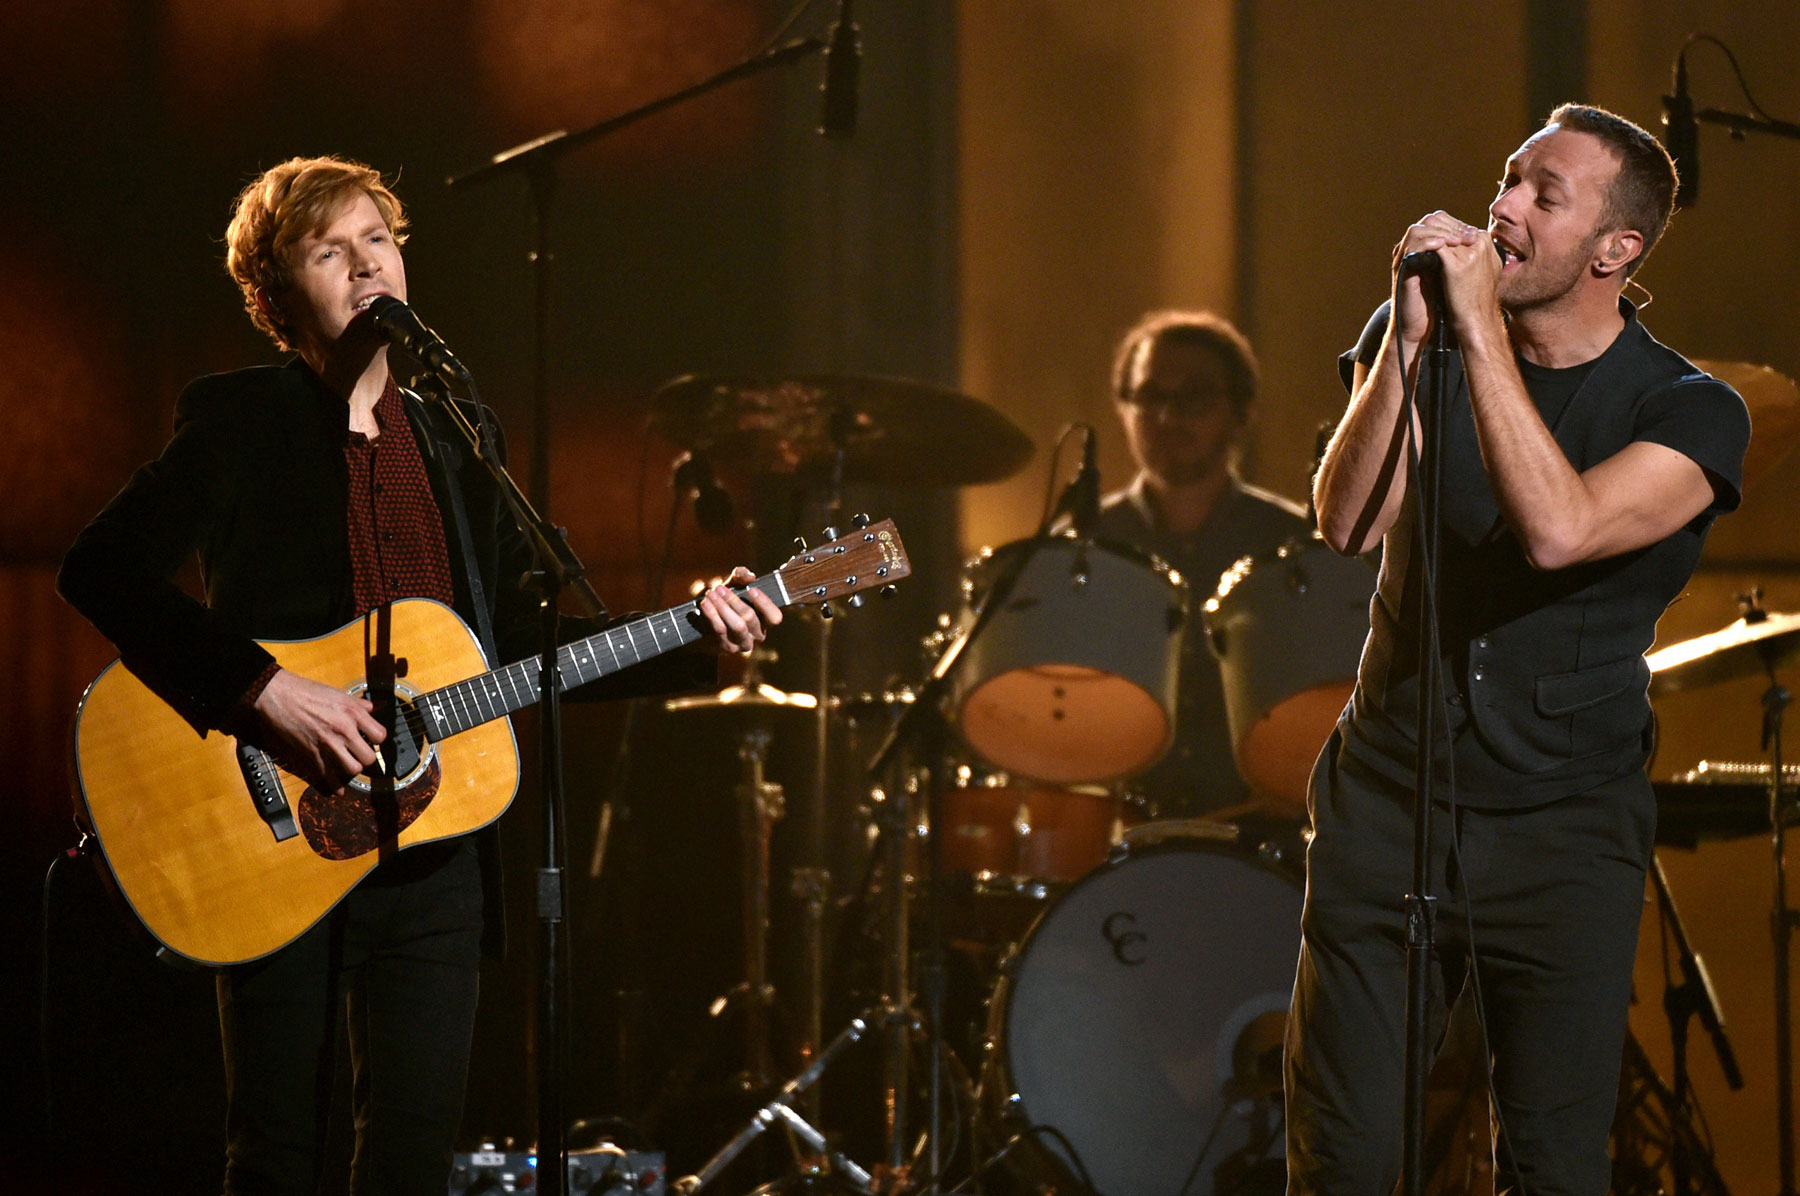 Beck, left, and Chris Martin perform at the 57th annual Grammy Awards on Sunday, Feb. 8, 2015, in Los Angeles. (Photo by John Shearer/Invision/AP)